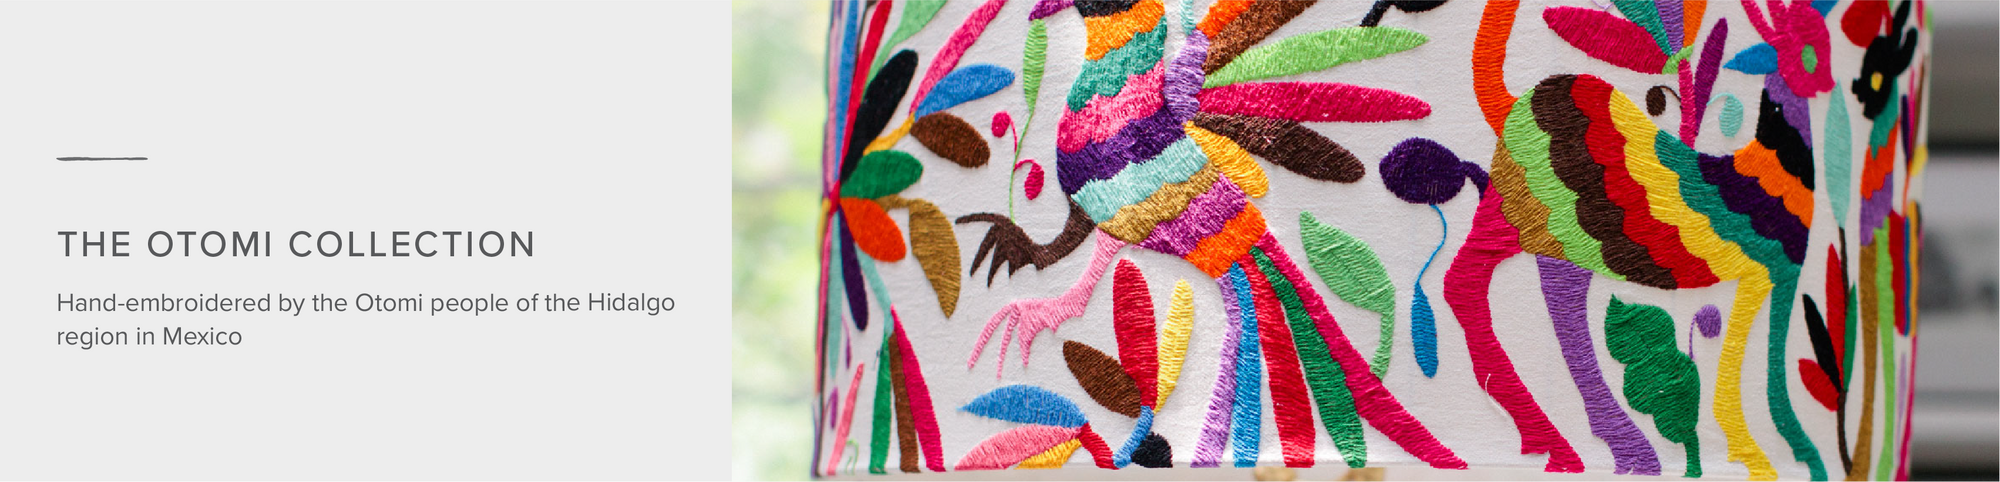 The Otomi Collection